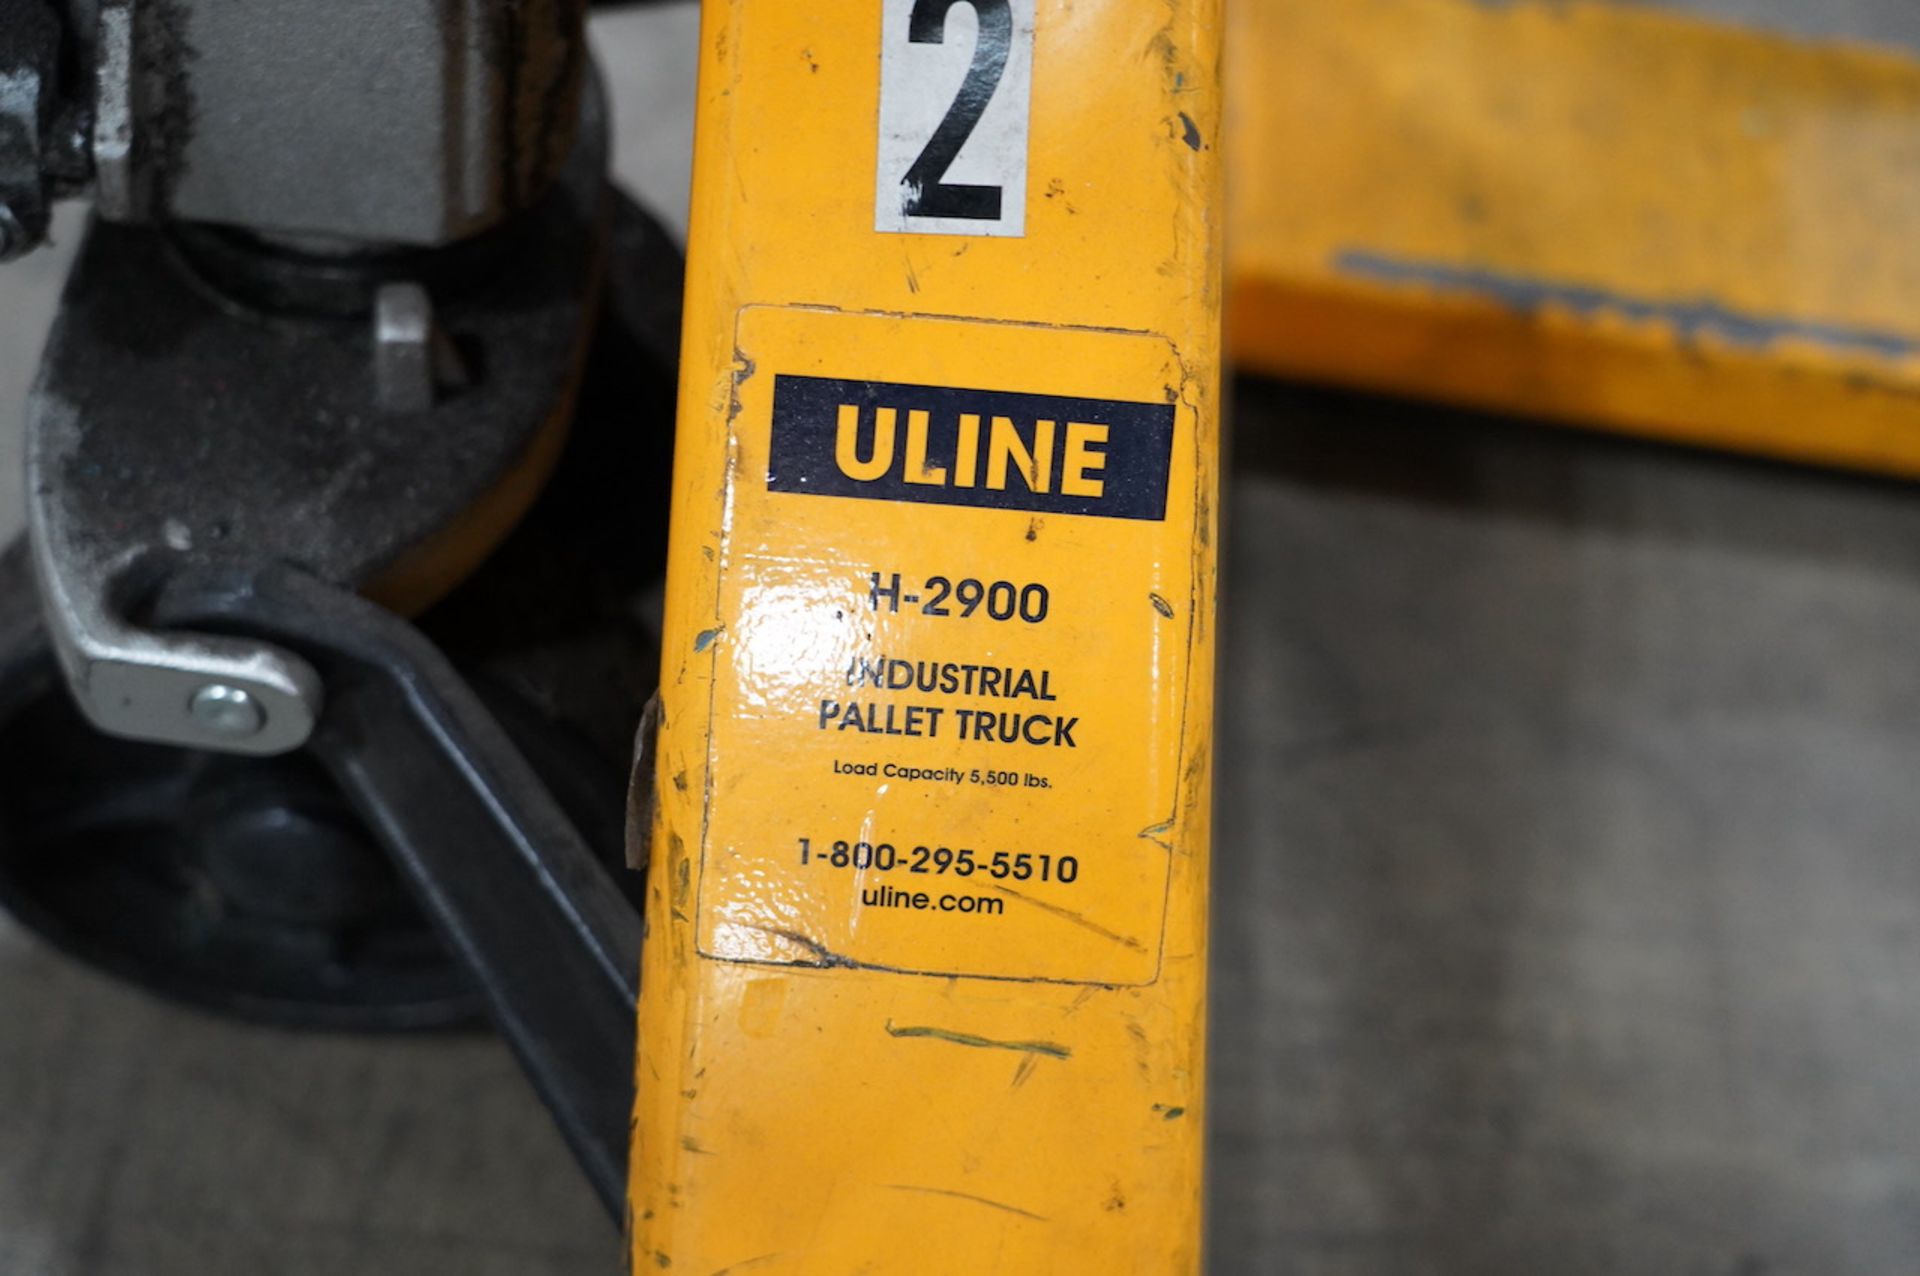 Uline 5500 lbs. Capacity Hand Hydraulic Pallet Truck - Image 2 of 3